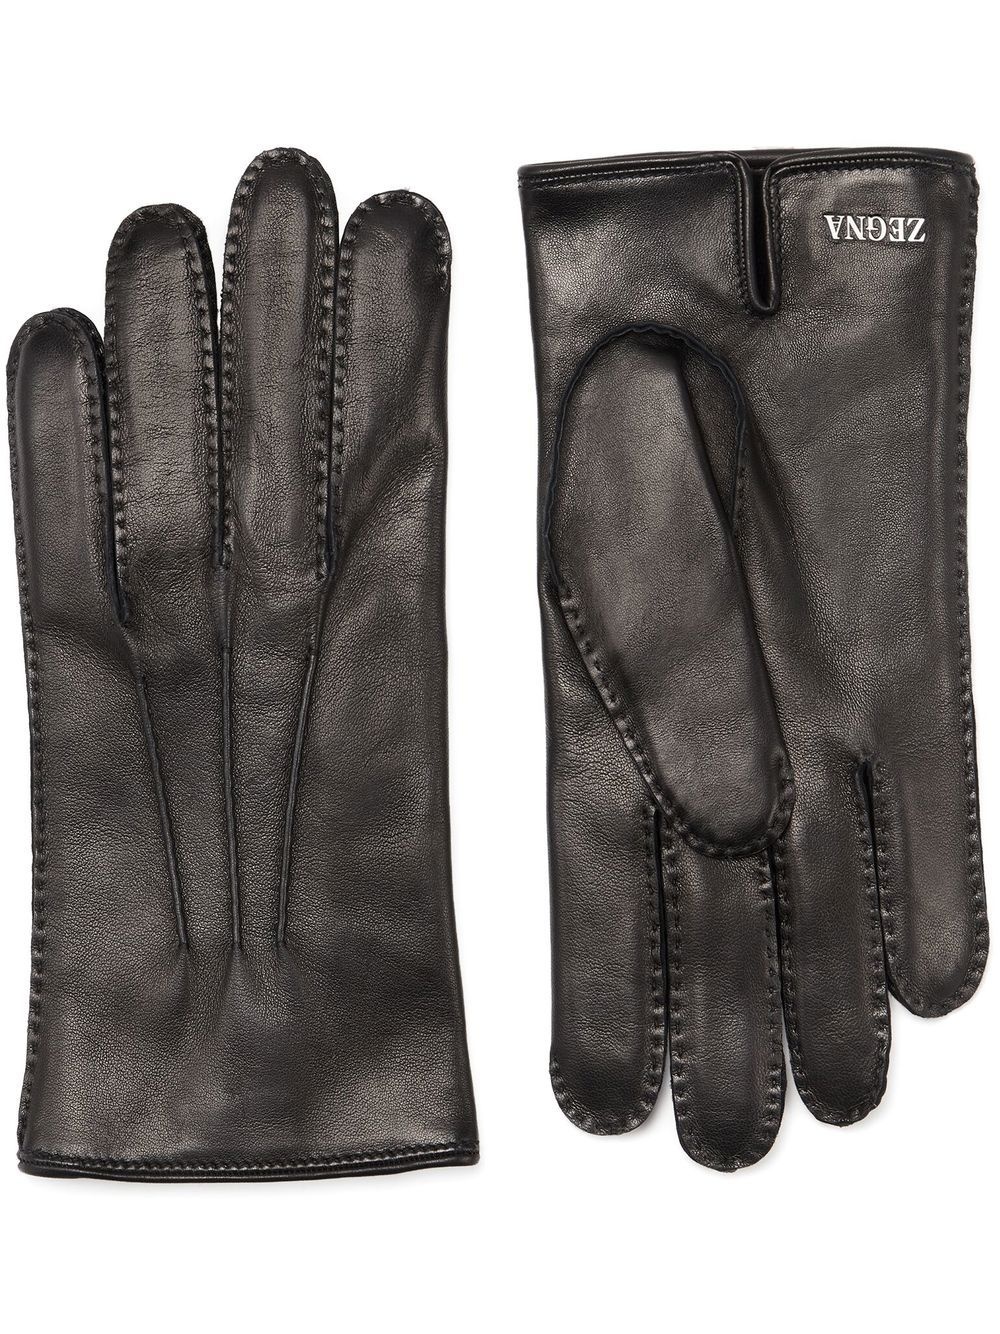 cashmere-lined leather gloves - 1